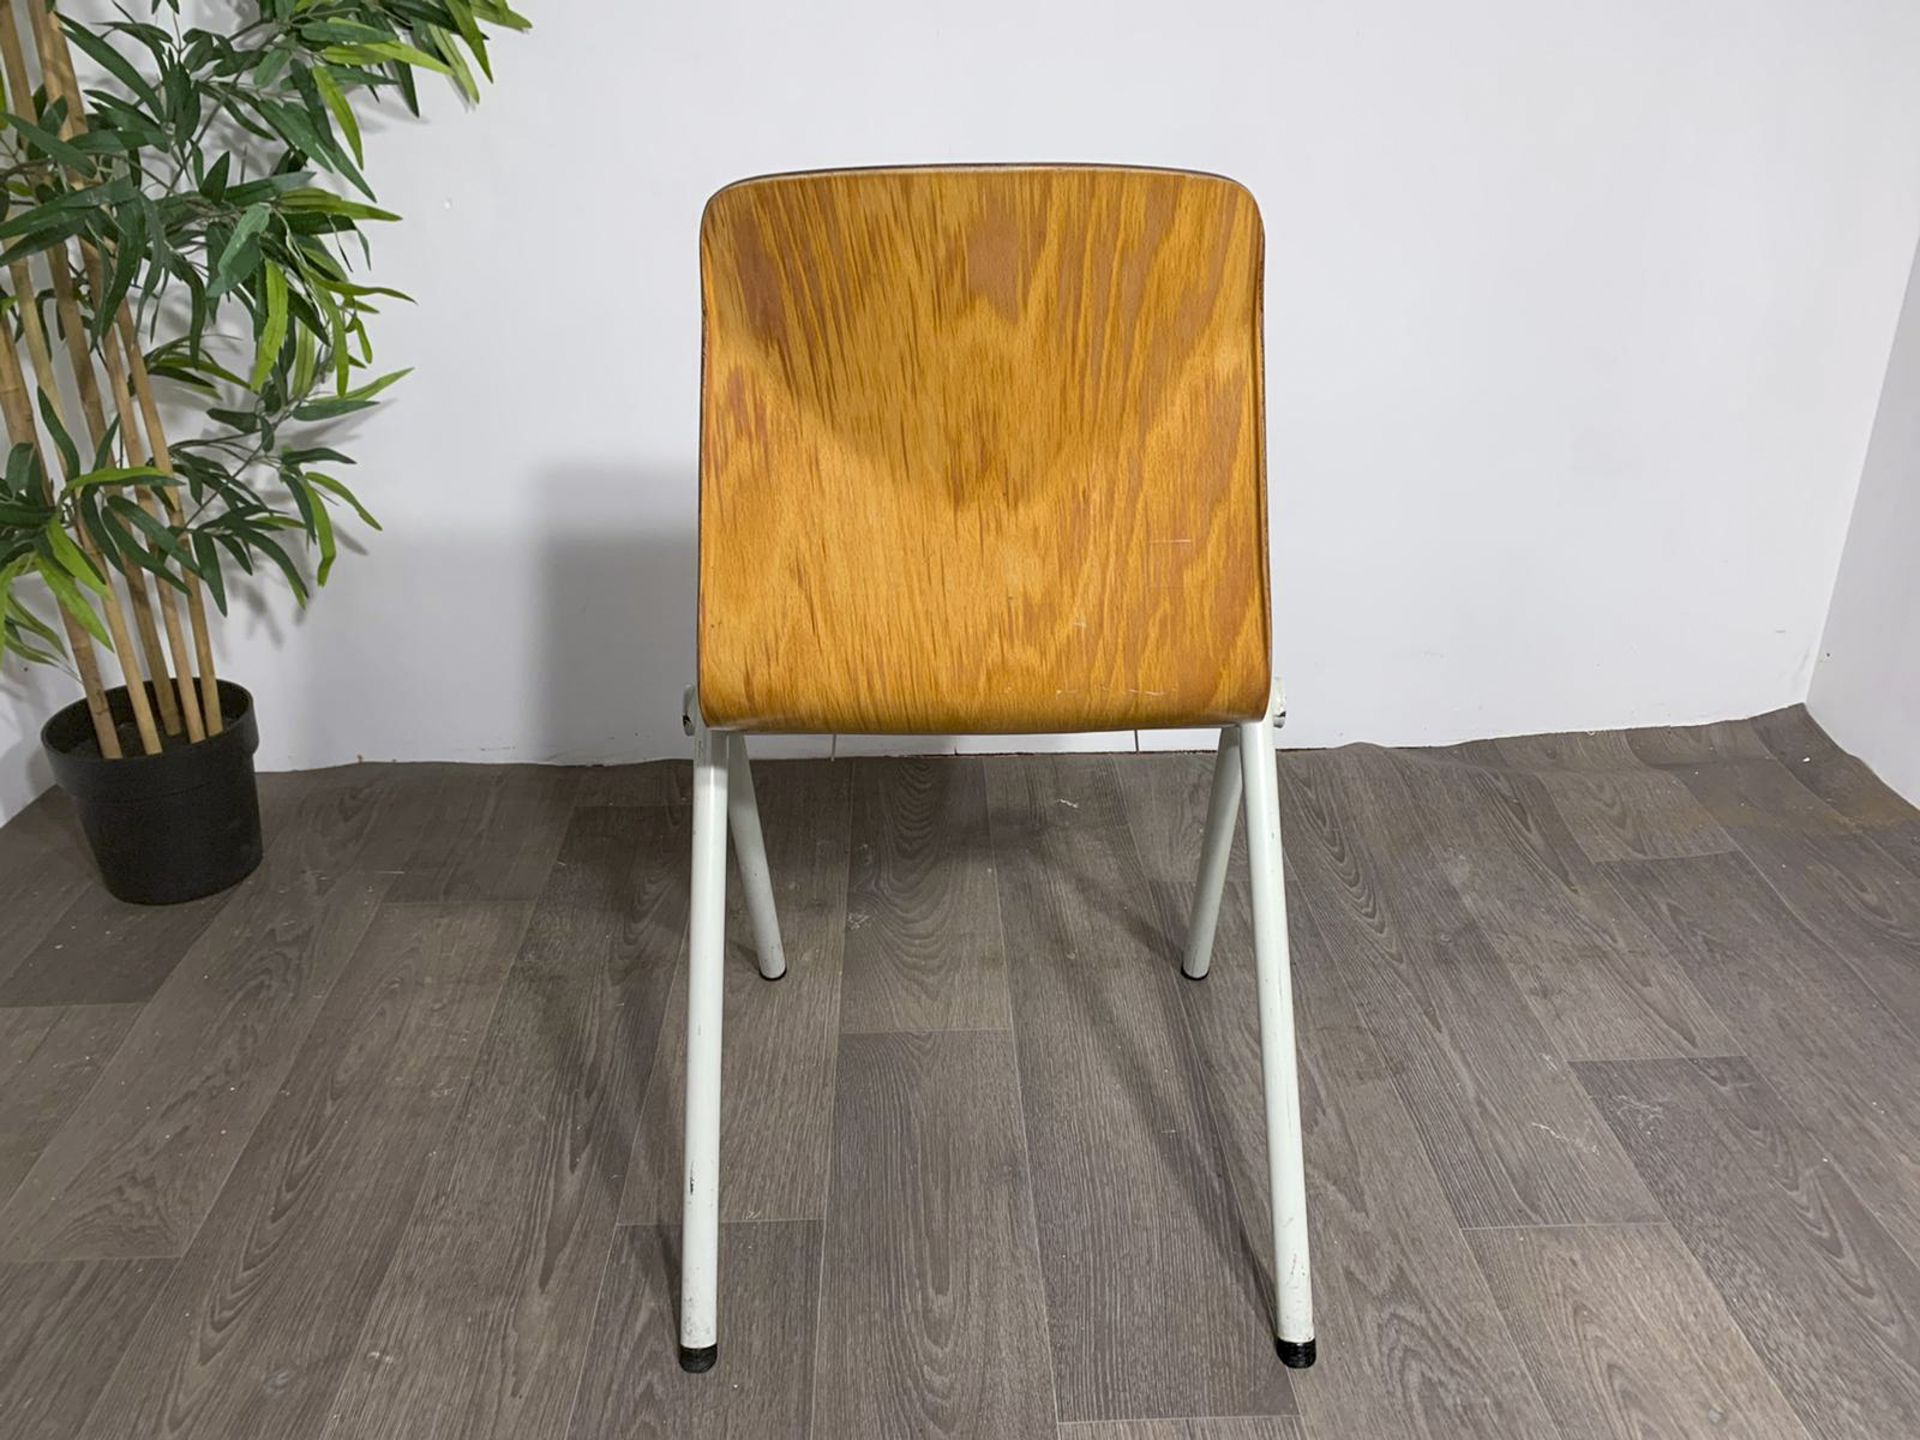 Mid Century Wooden Chair with Steel Legs - Image 4 of 9